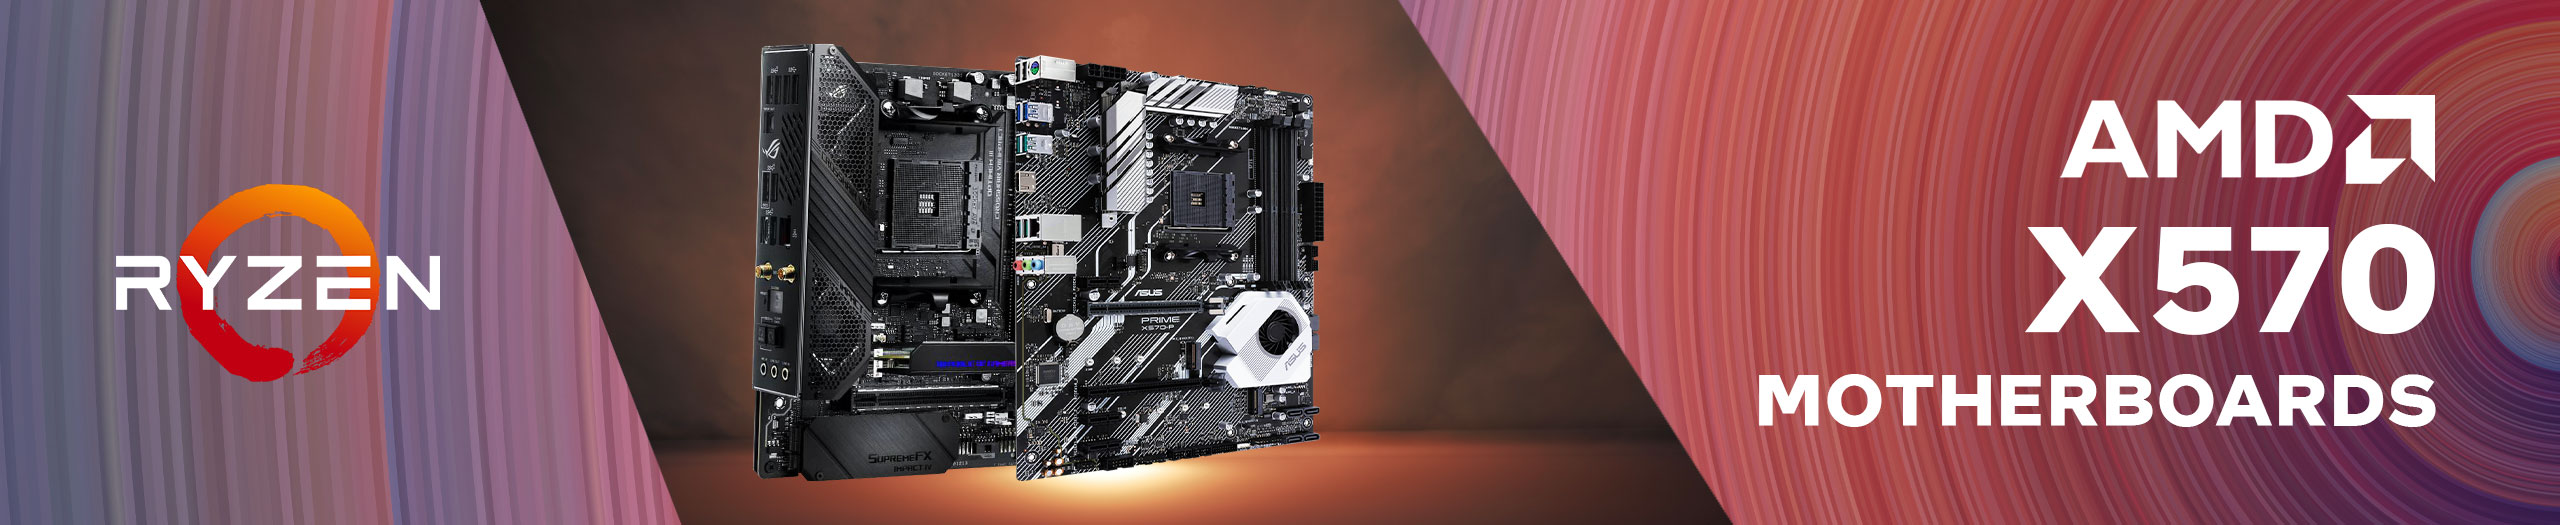 AMD X570 Motherboards